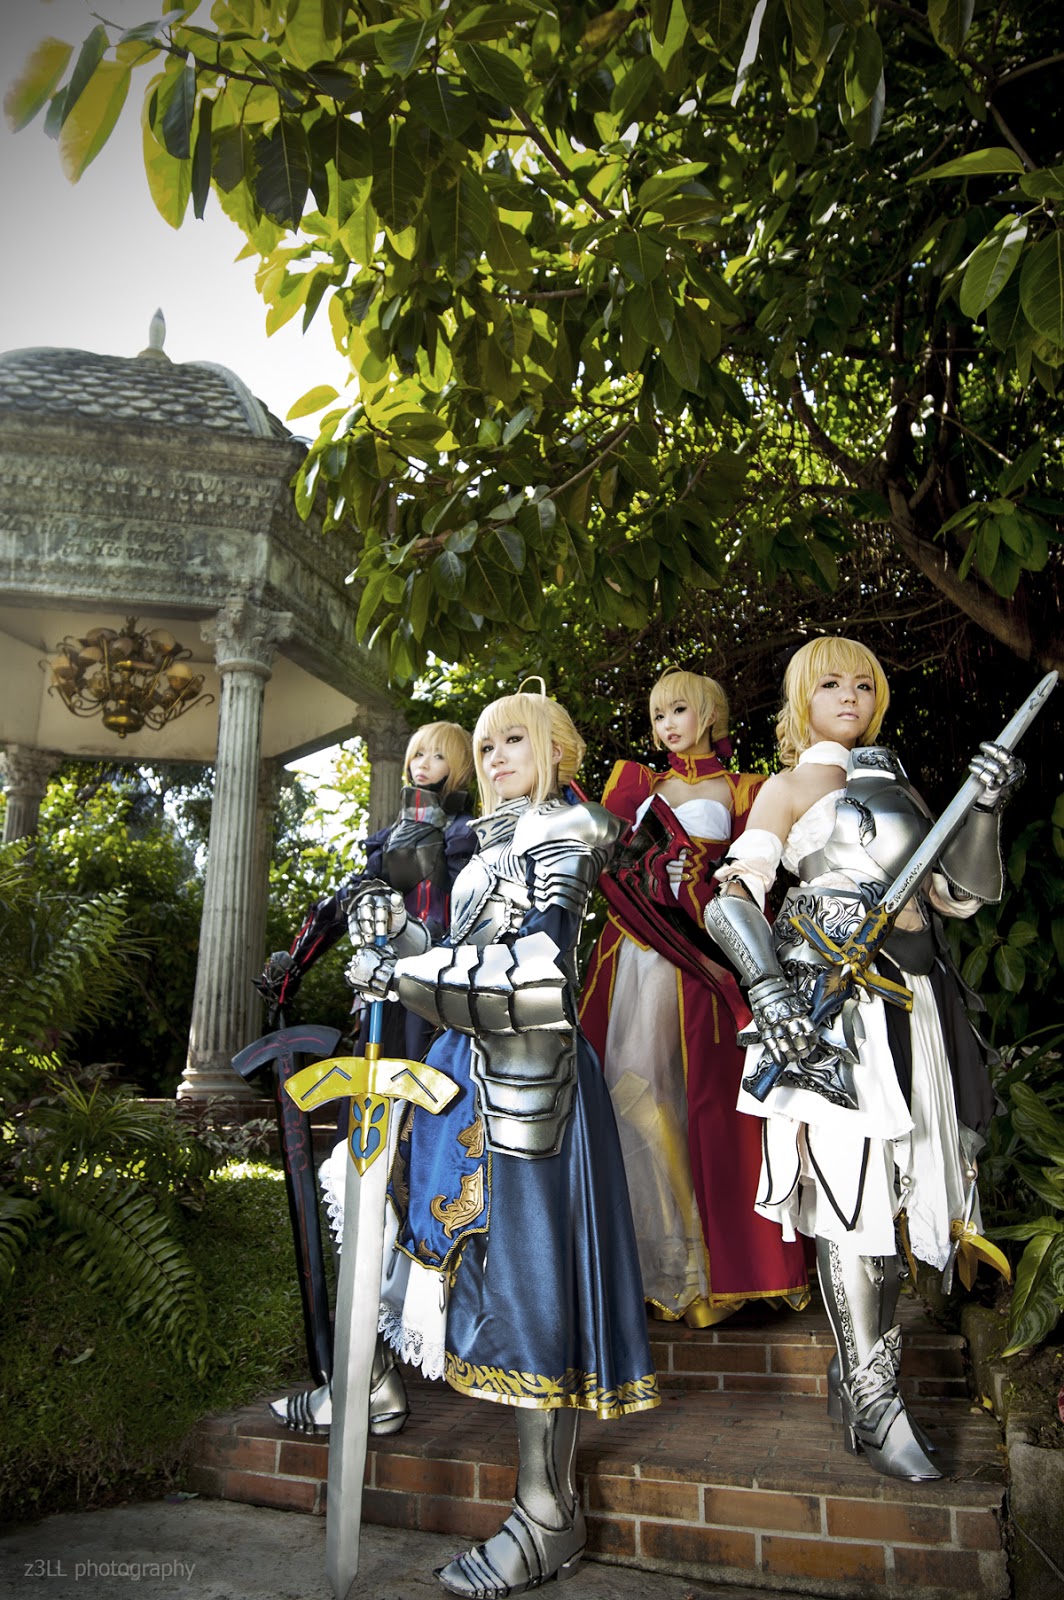 People 1064x1600 Asian cosplay Japanese Japanese women women Fate series Fate/Extra CCC Fate/Extra Fate/Grand Order Fate/Unlimited Codes  Fate/Stay Night fate/stay night: heaven's feel Artoria Pendragon Saber Saber Alter Saber Lily Nero Claudius Excalibur blonde long hair